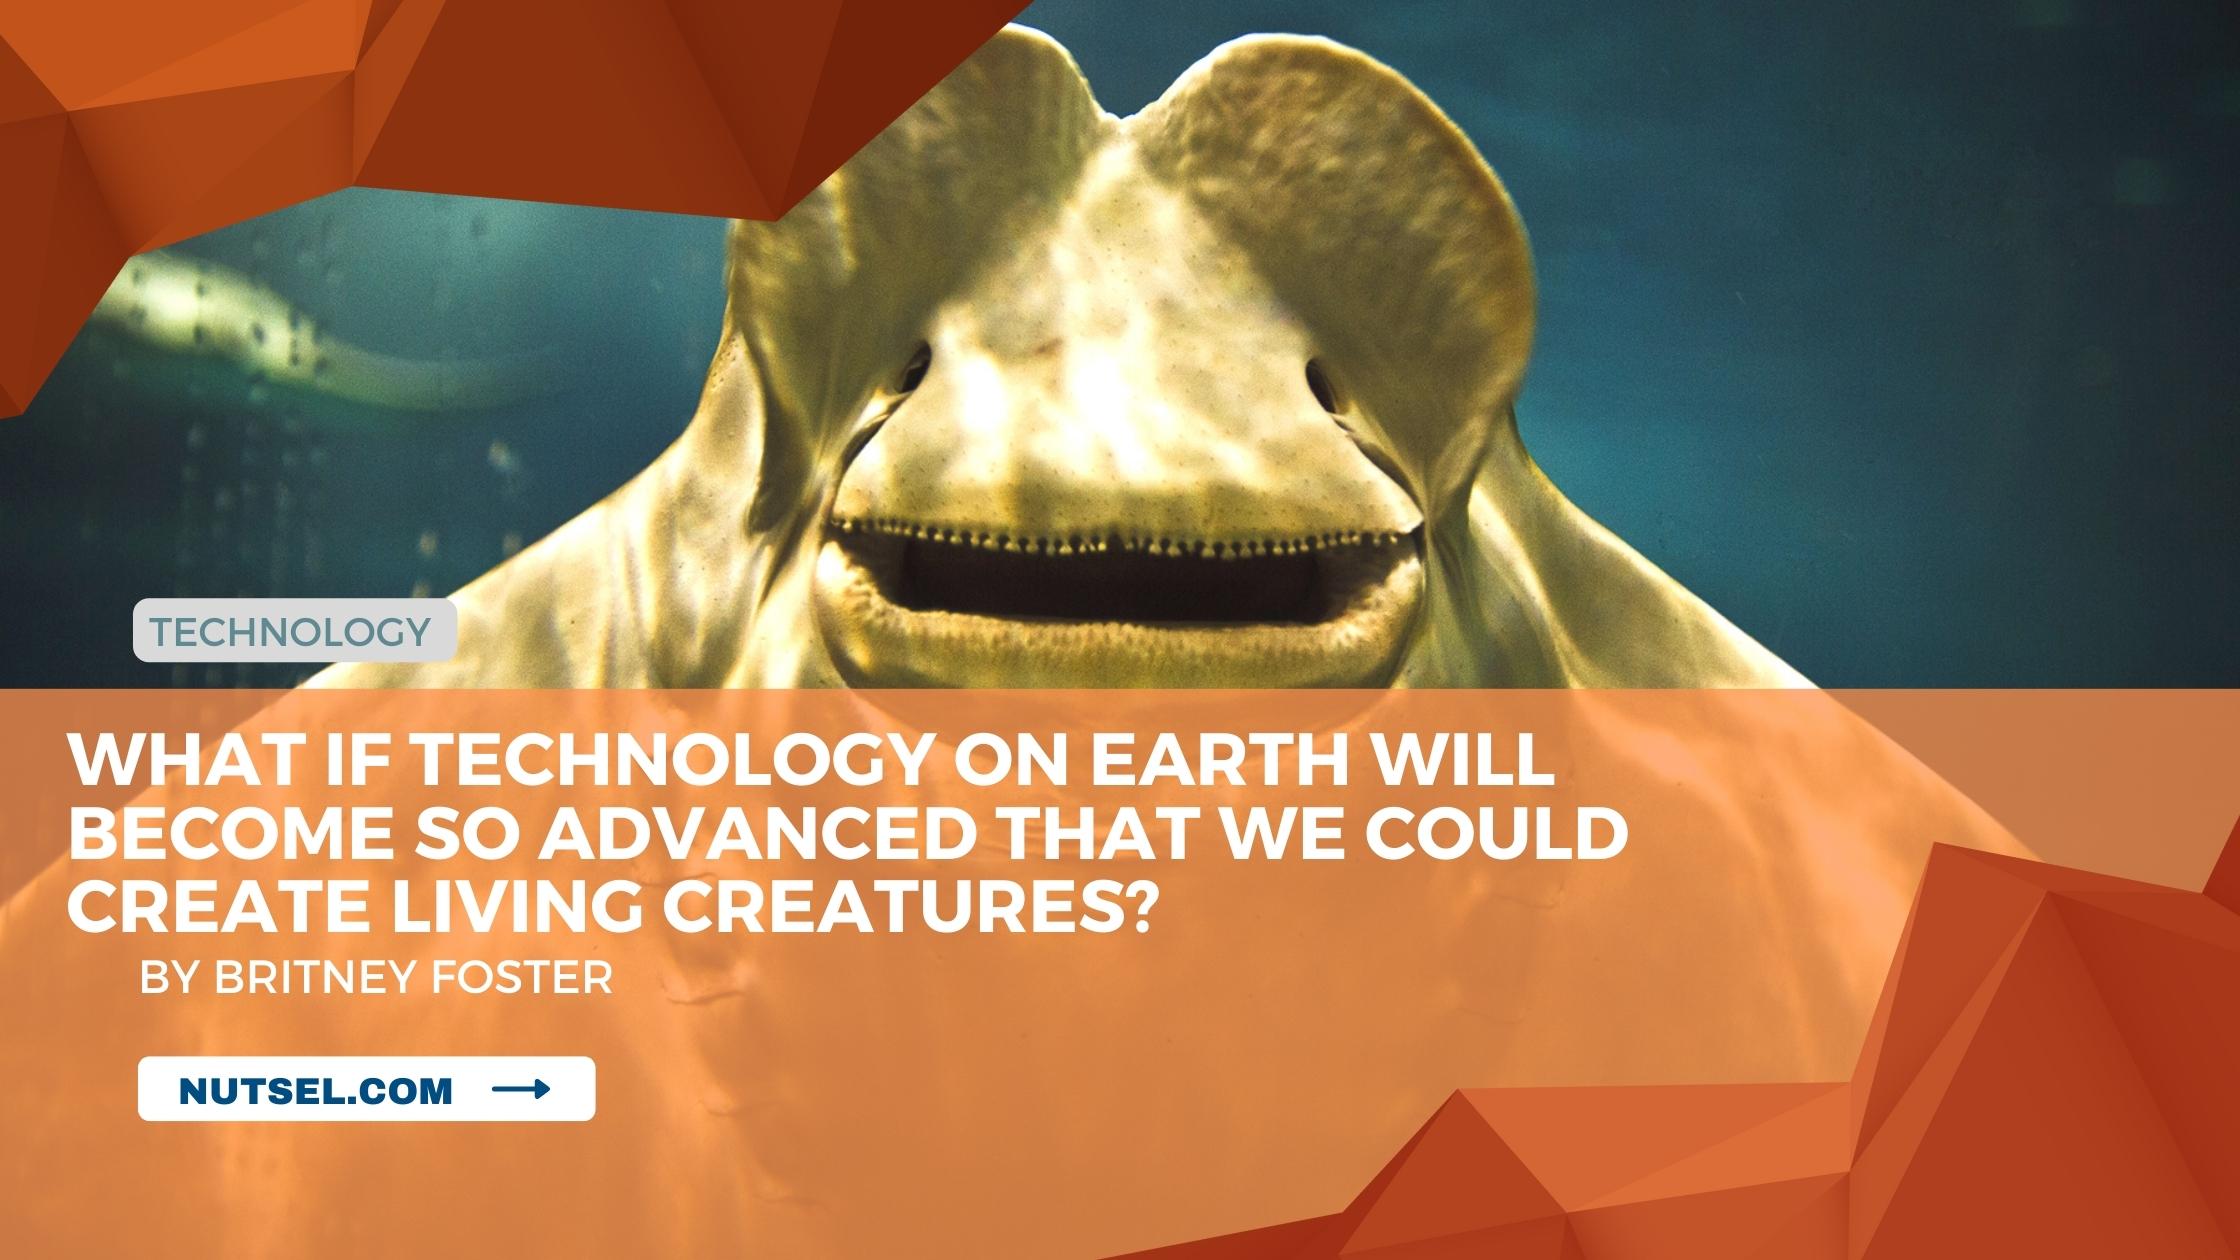 What if technology on Earth will become so advanced that we could create living creatures?